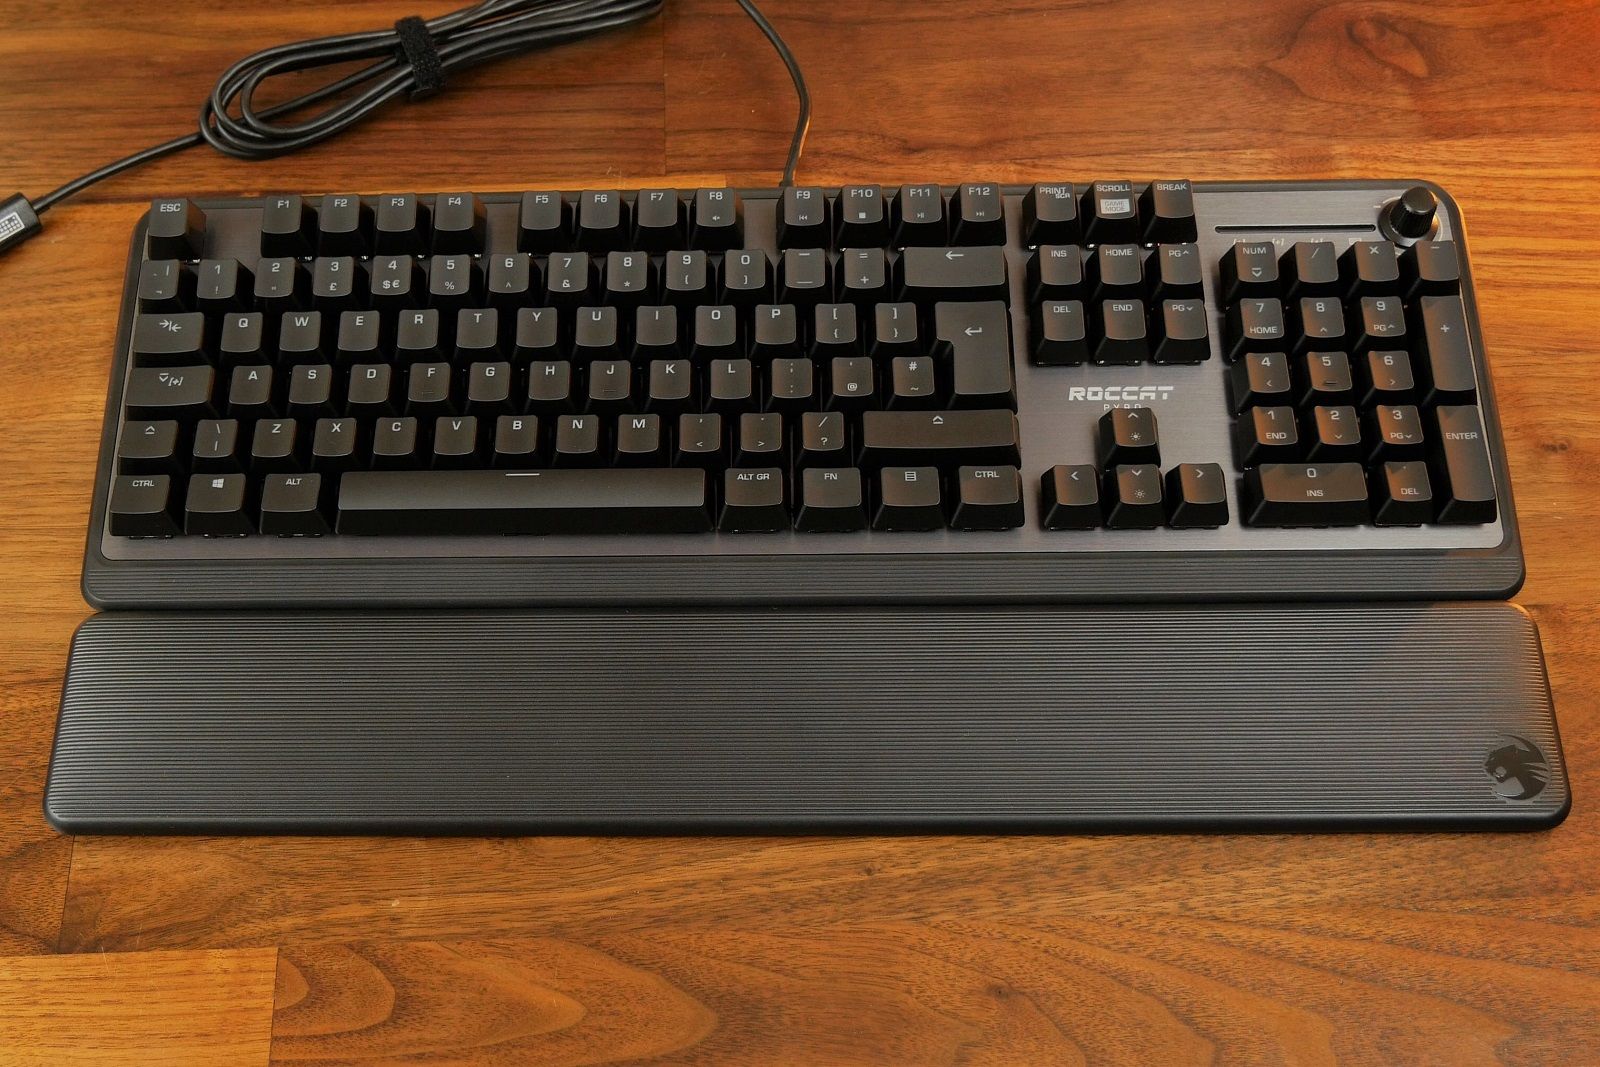 Roccat Pyro gaming keyboard review: An affordable mechanical keyboard with appeal photo 8